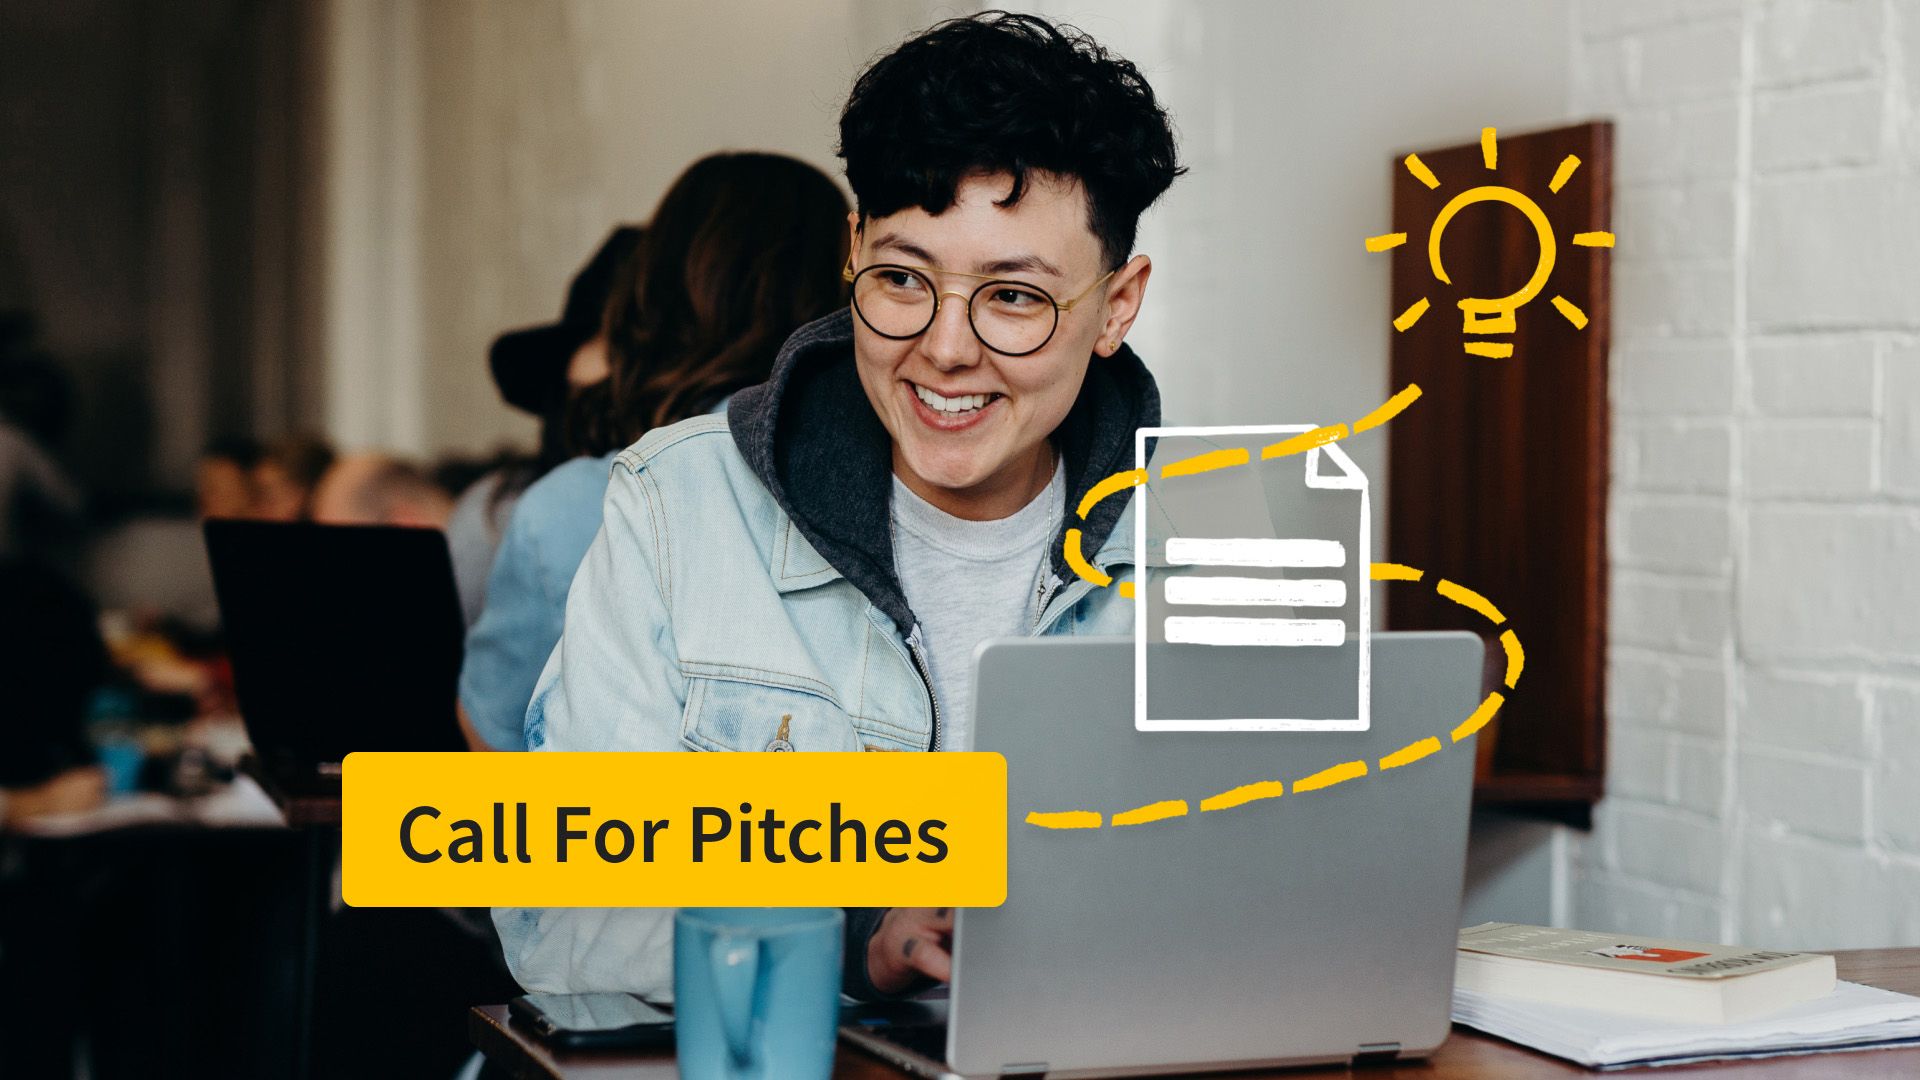 Call for Pitches Feature: How To Find Amazing Brand Stories